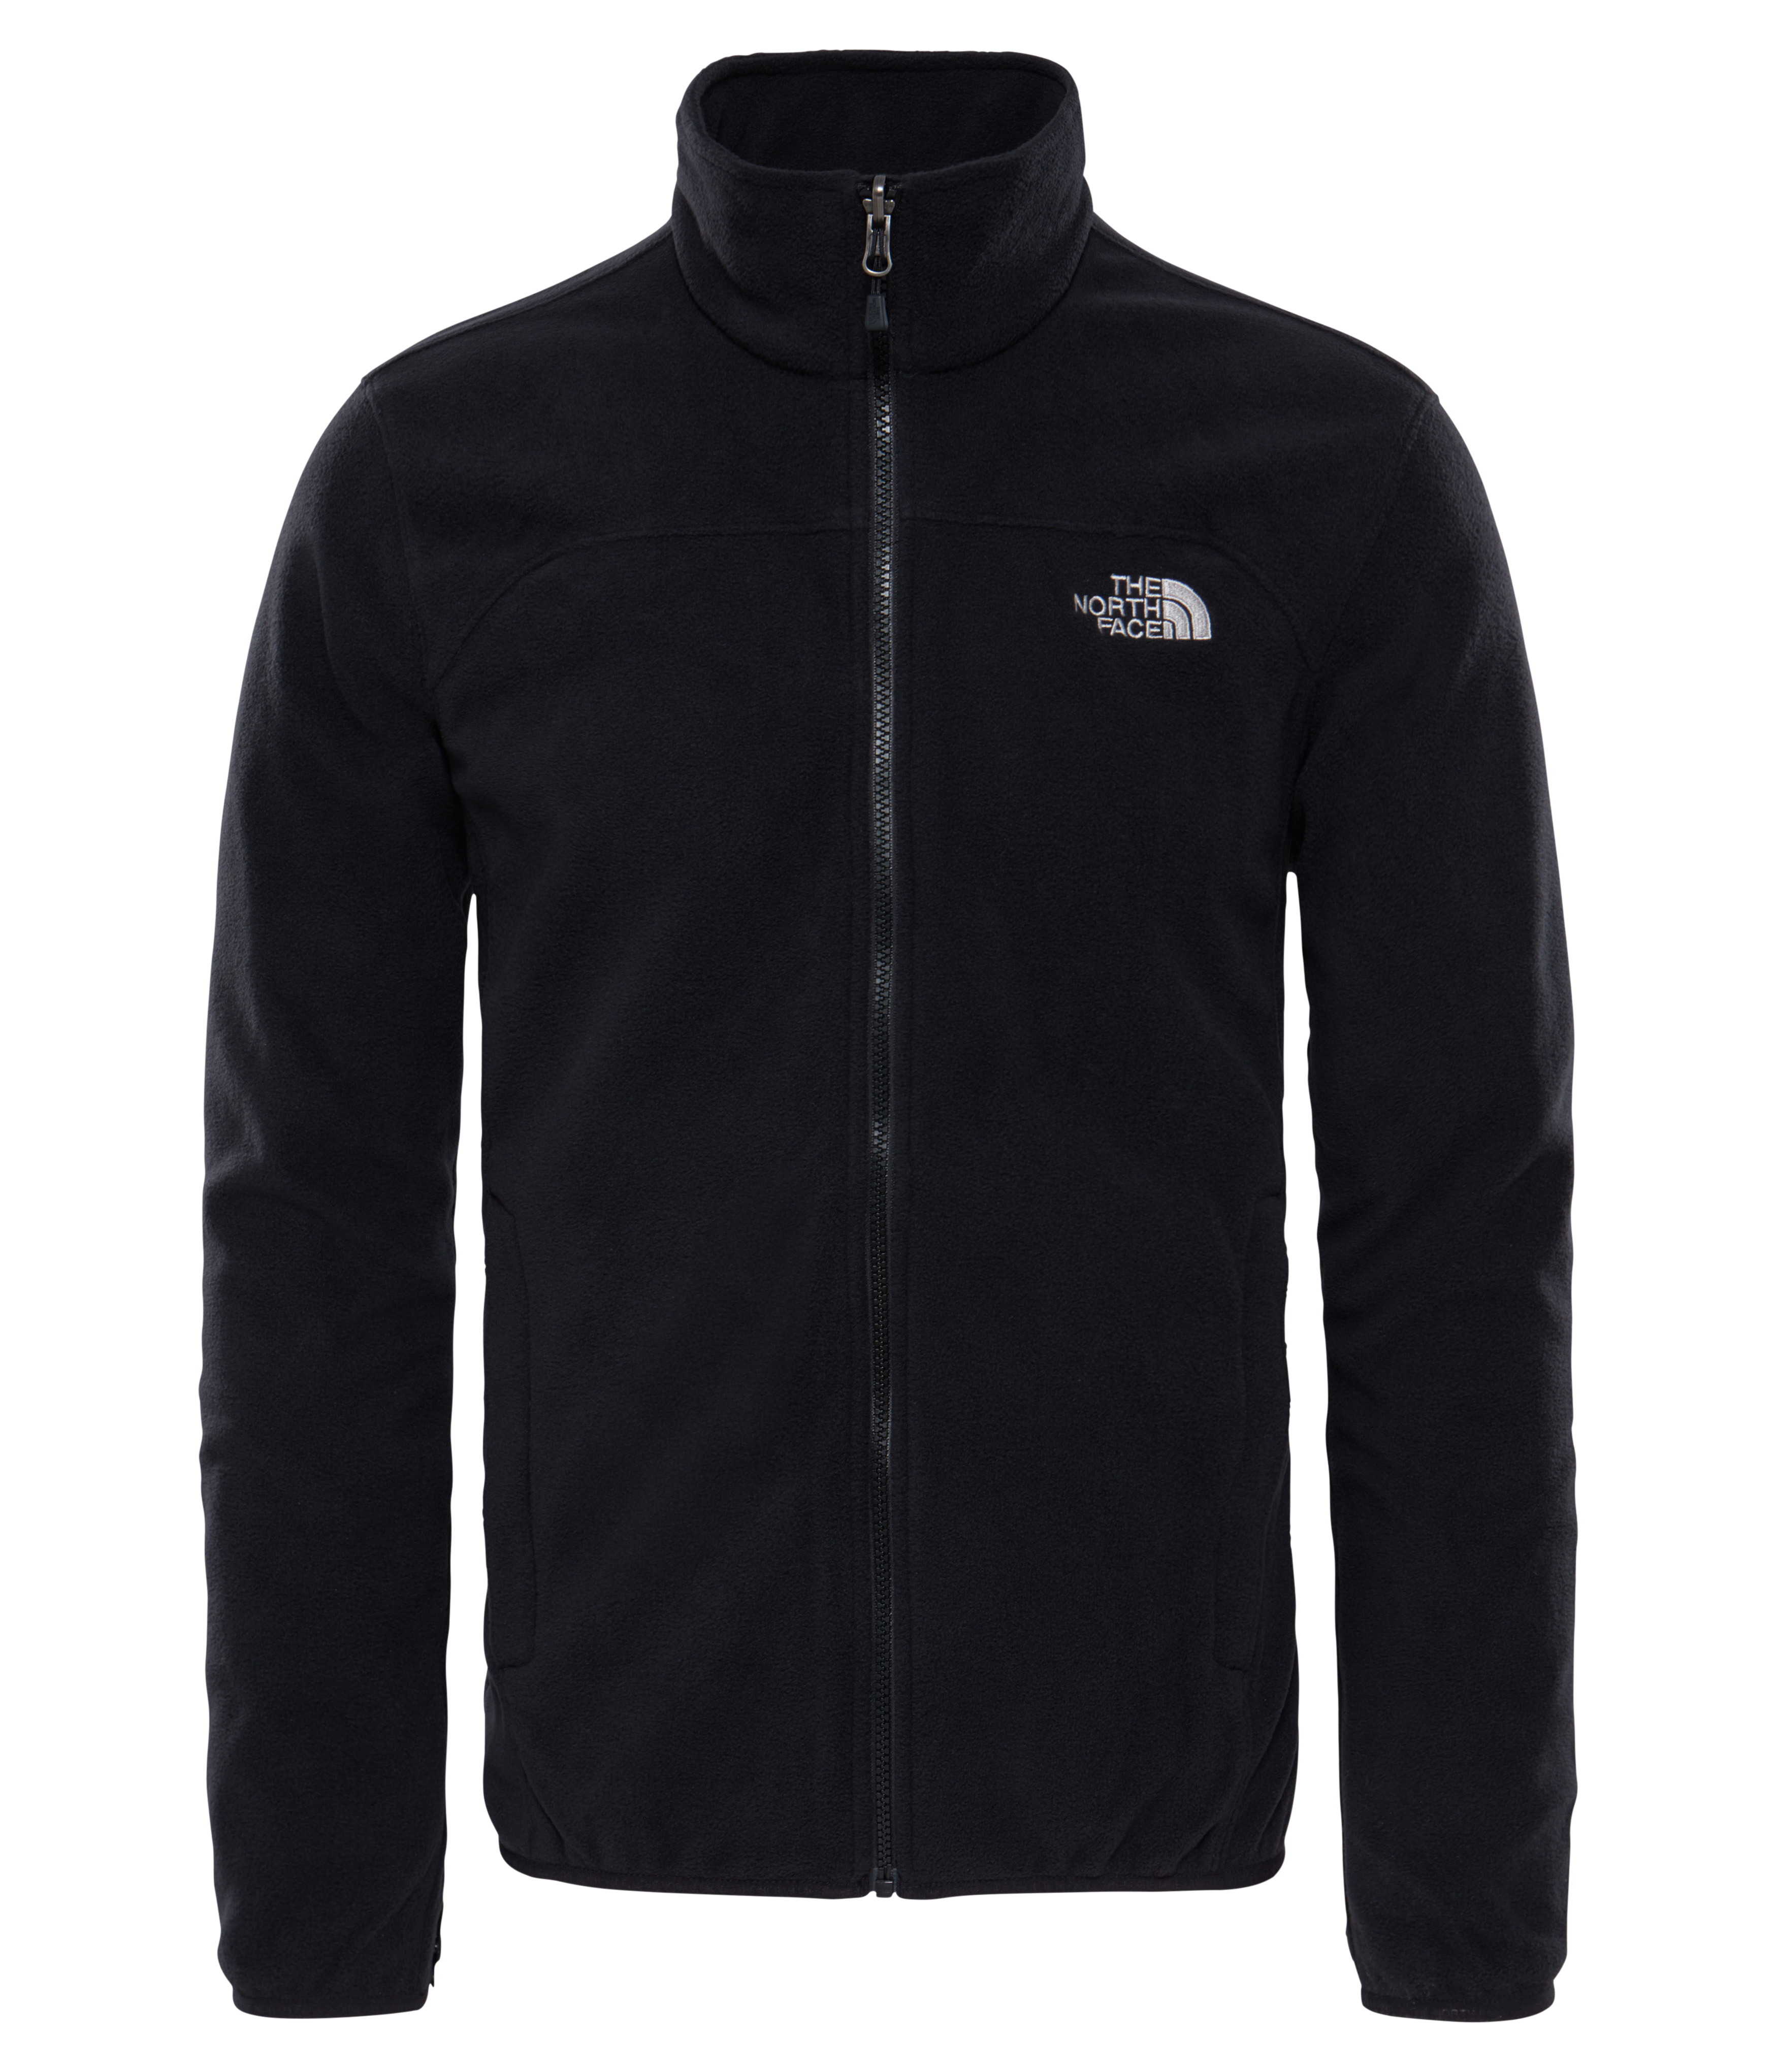 The North Face Evolve Triclimate II Jacket